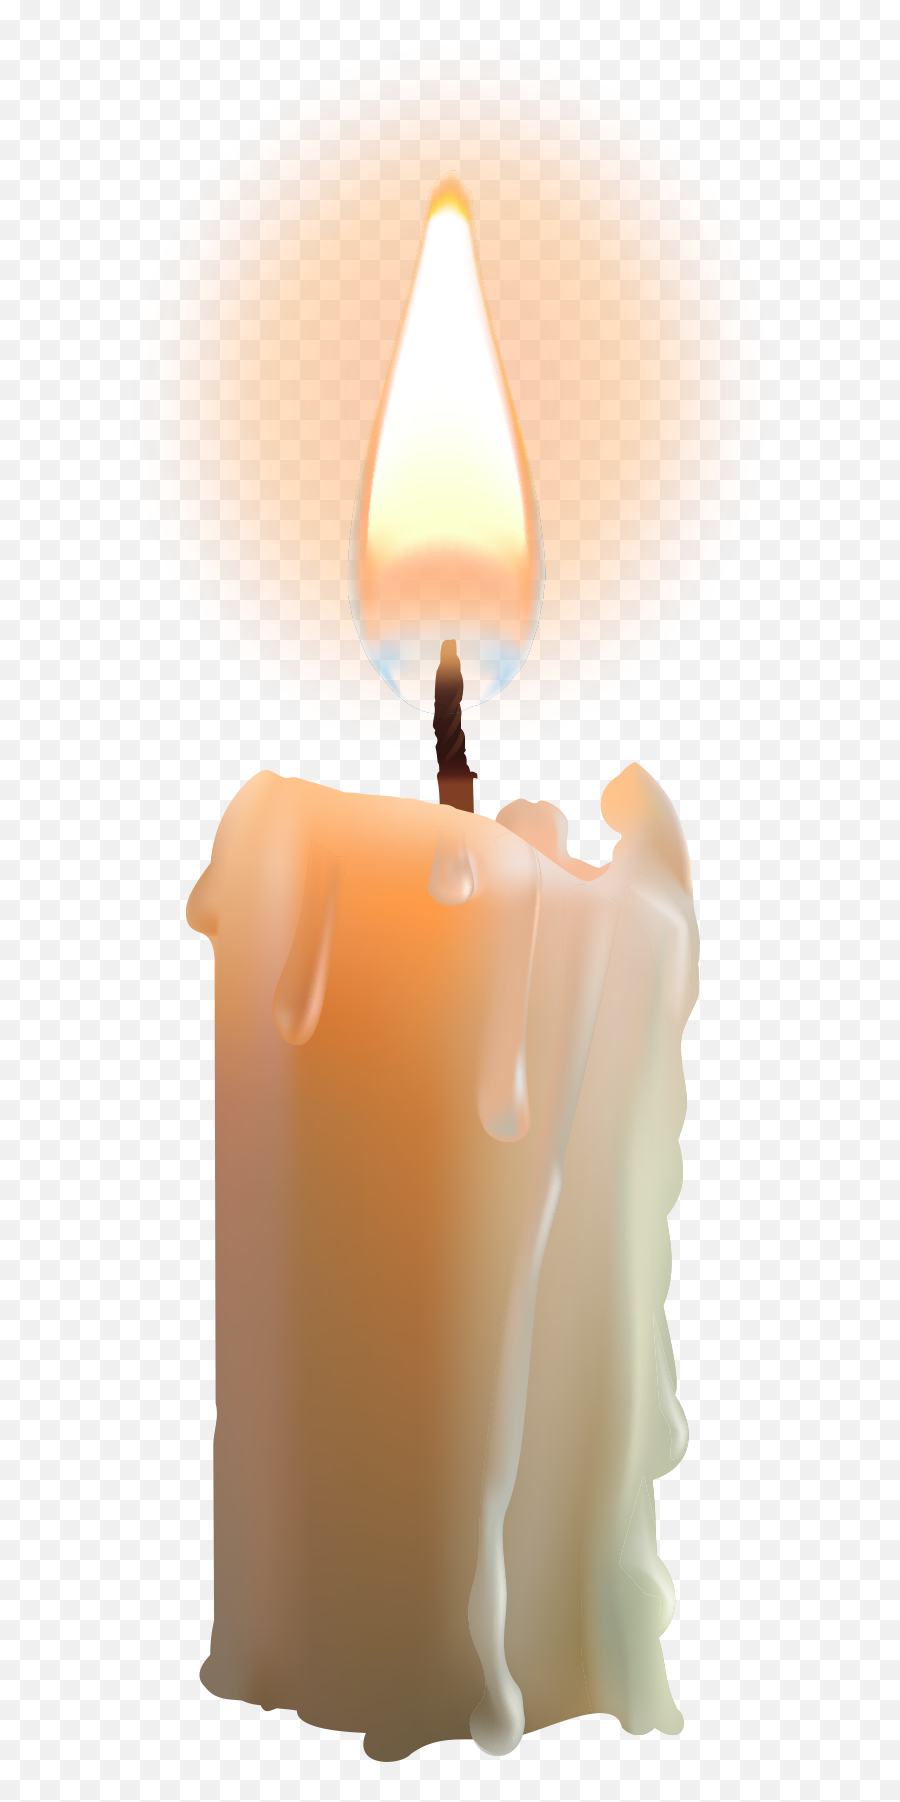 Table Candle Png Image Free Download - Candle Images Png Emoji,Emoji Candles